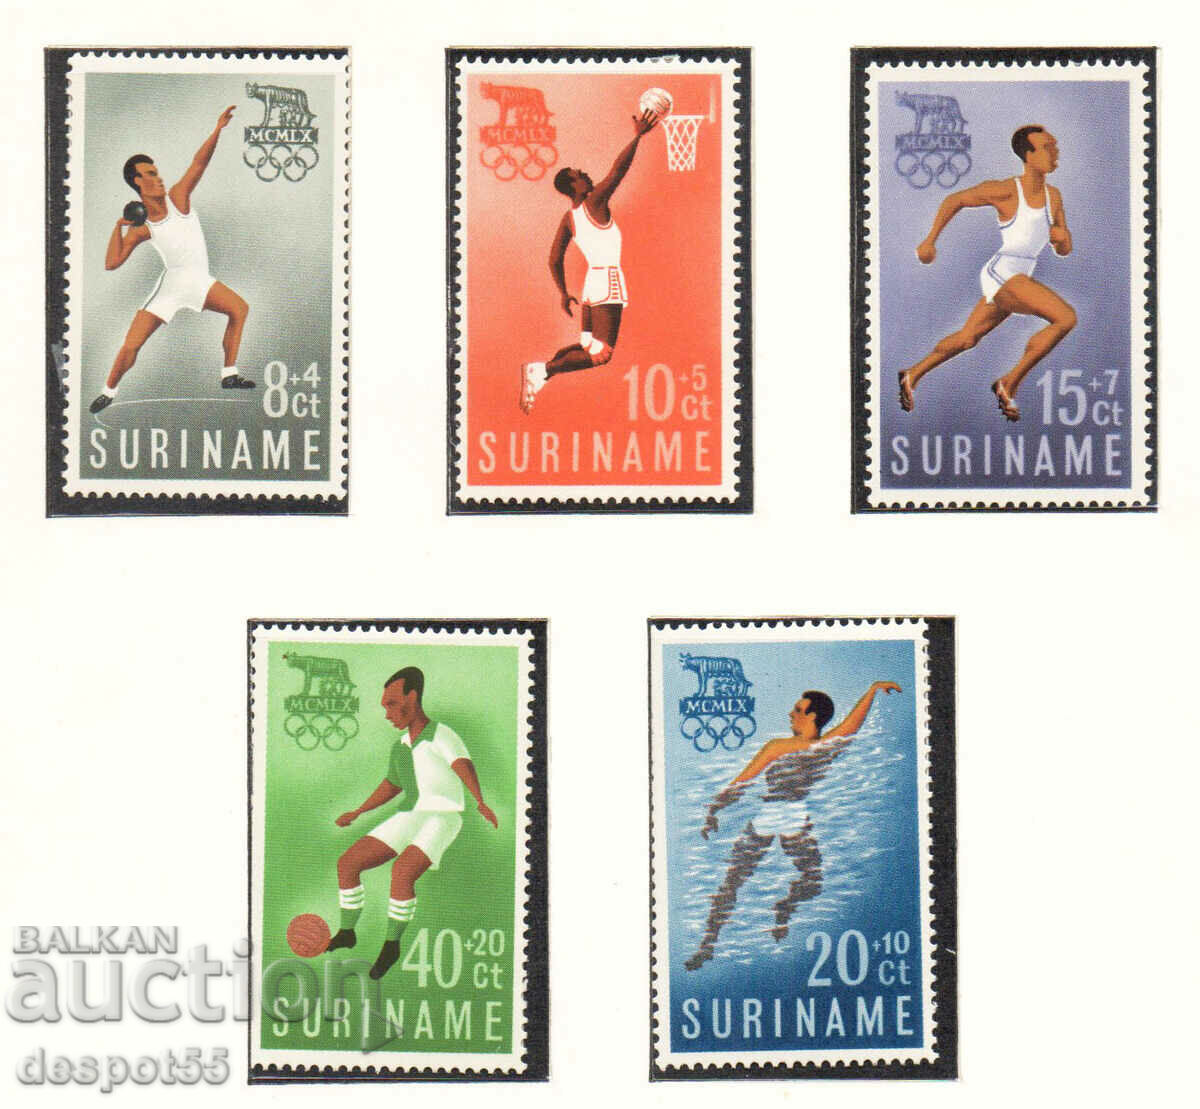 1960. Suriname. Olympic Games - Rome, Italy.